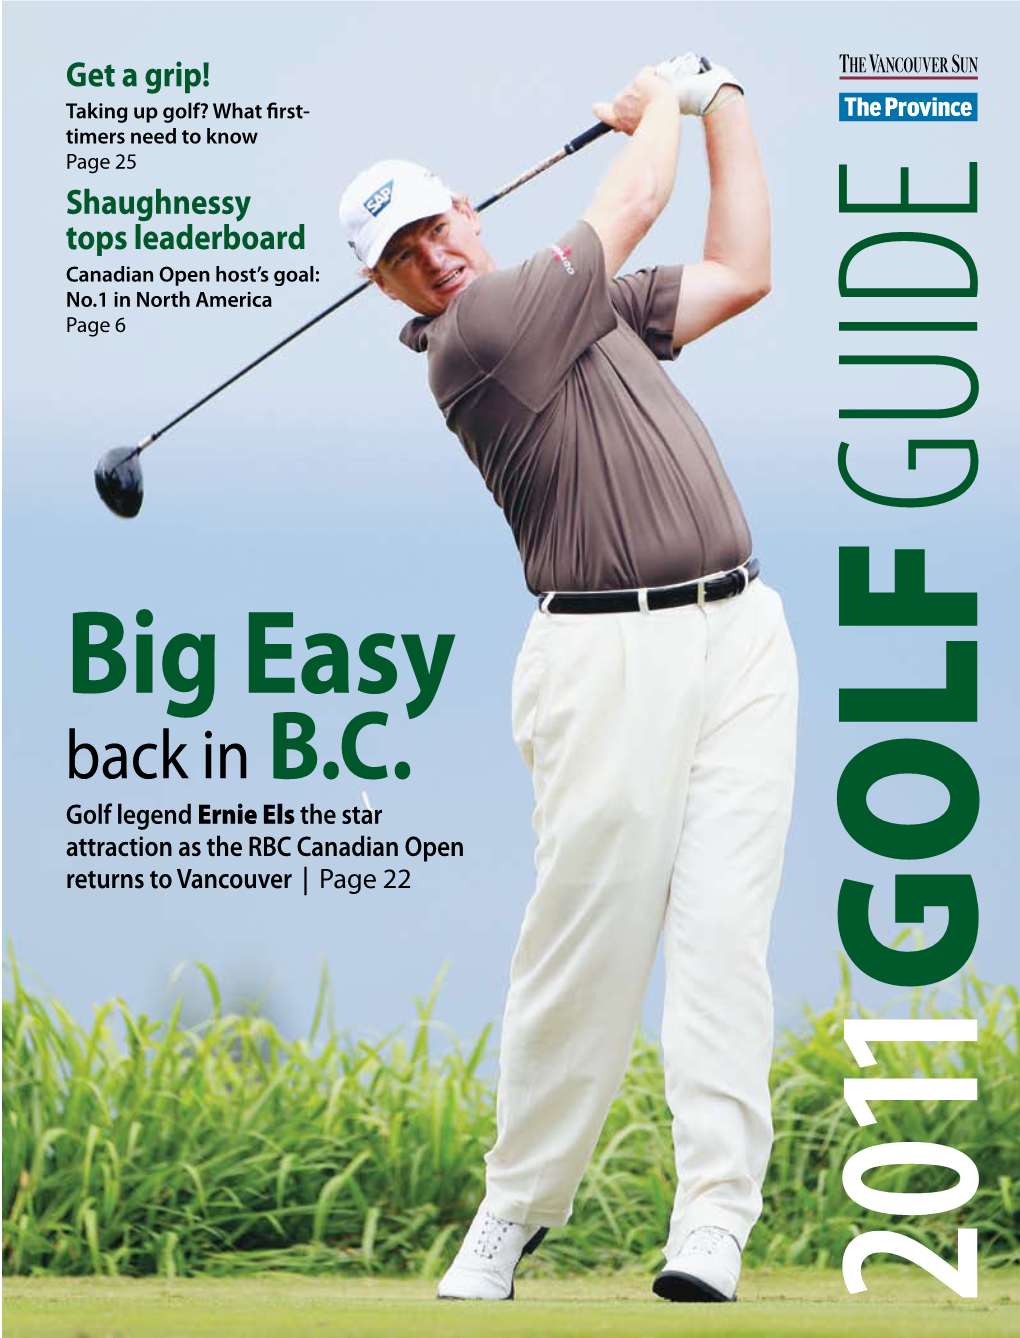 Big Easy Page 6 No.1 America Innorth Canadian Host’S Open Goal: Tops Leaderboard Shaughnessy Page 25 Timers Needto Know Taking Upgolf? What First- Agrip! Get